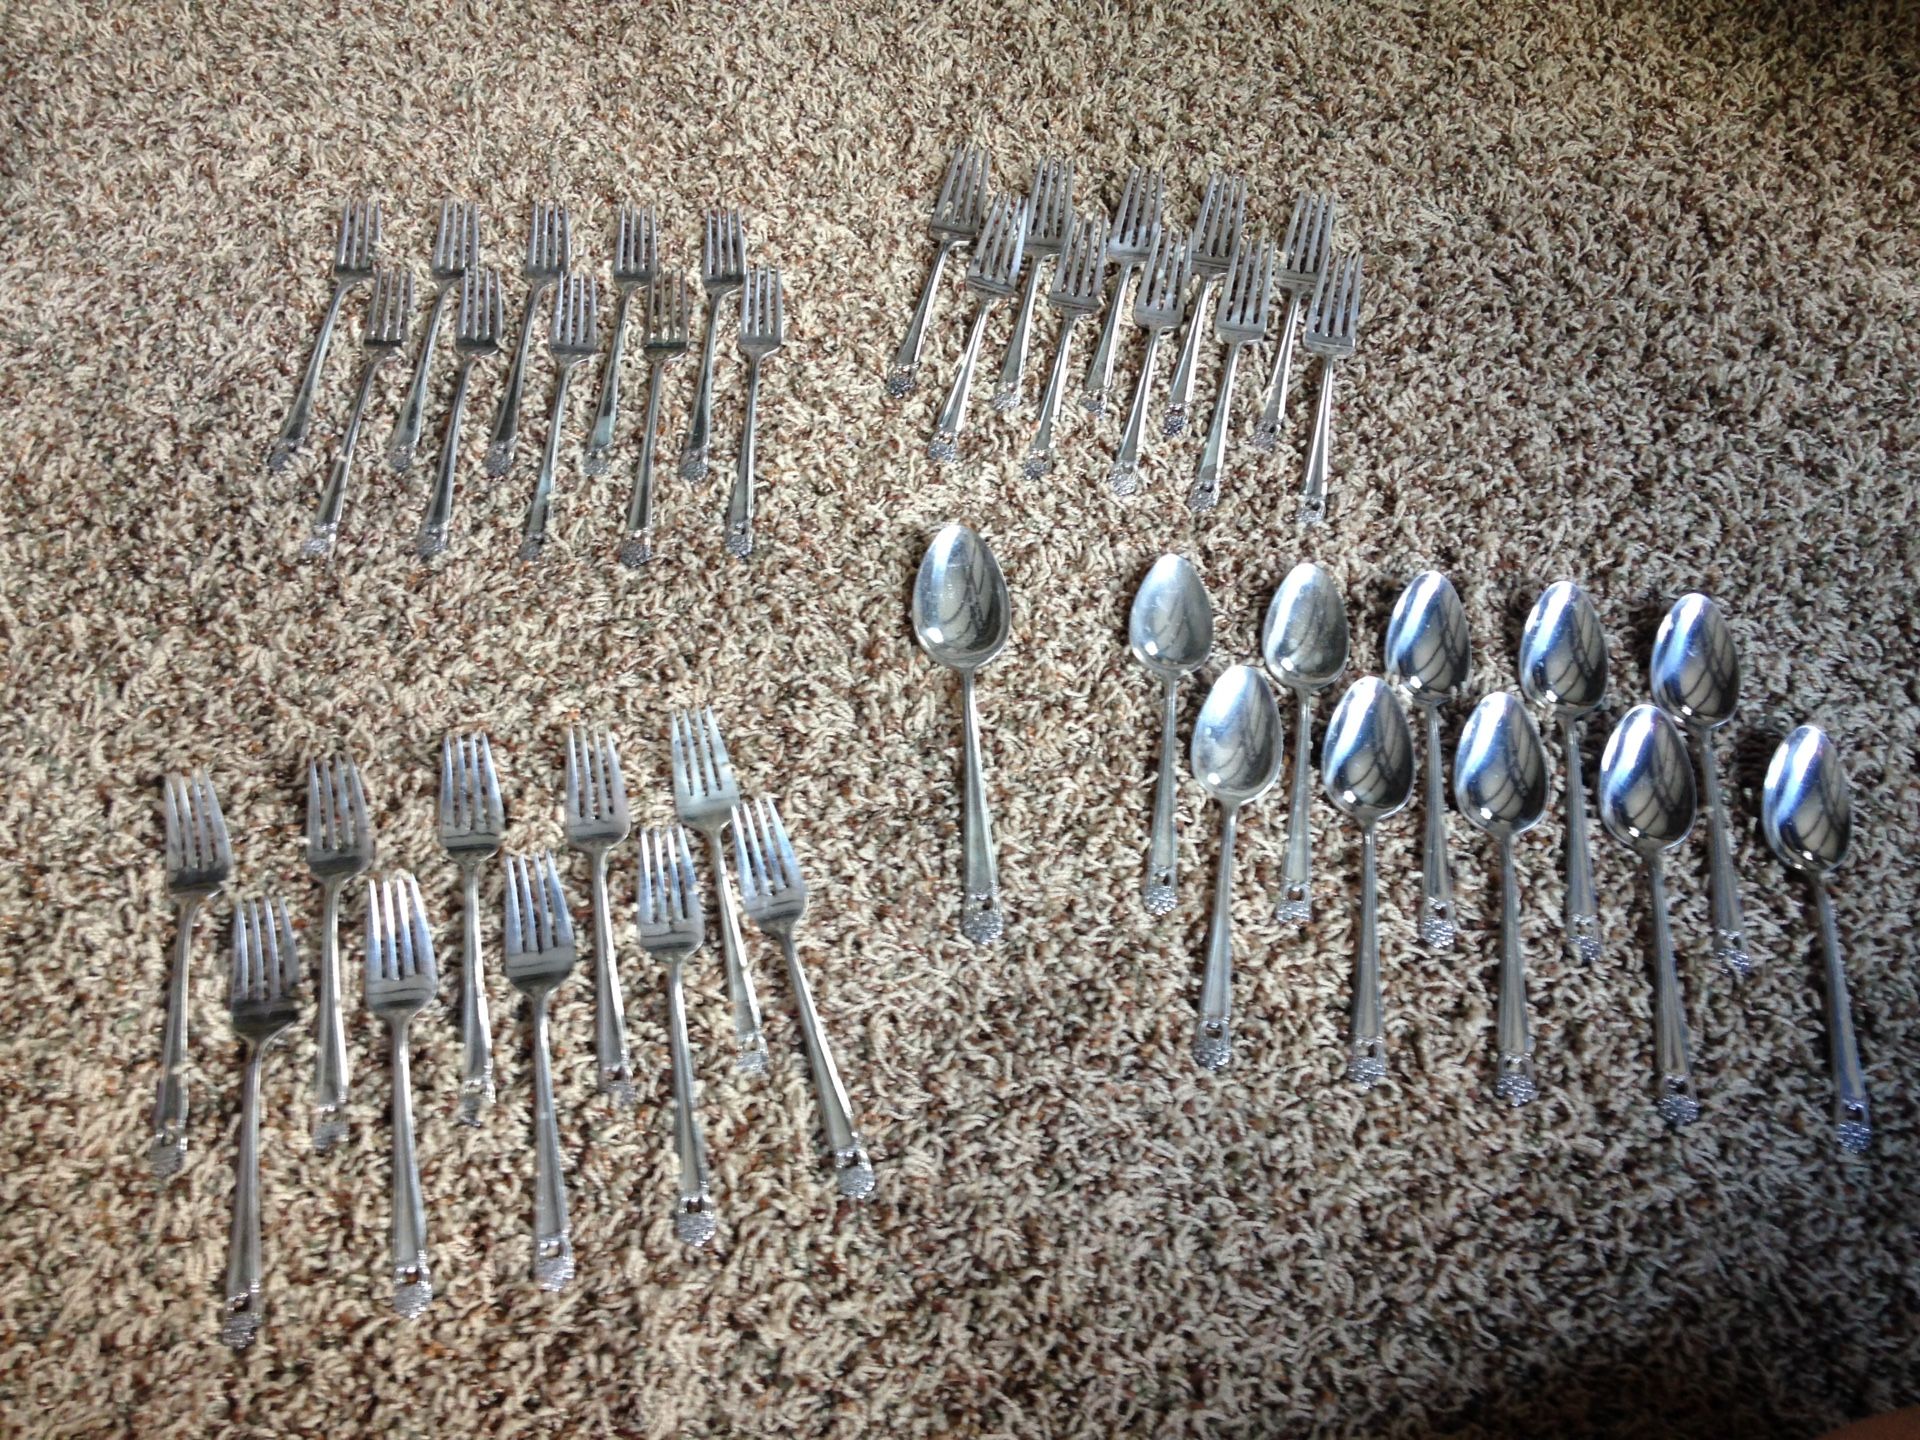 1847 Rogers Bros. Eternally Yours Silverware set (41 pcs) no knives